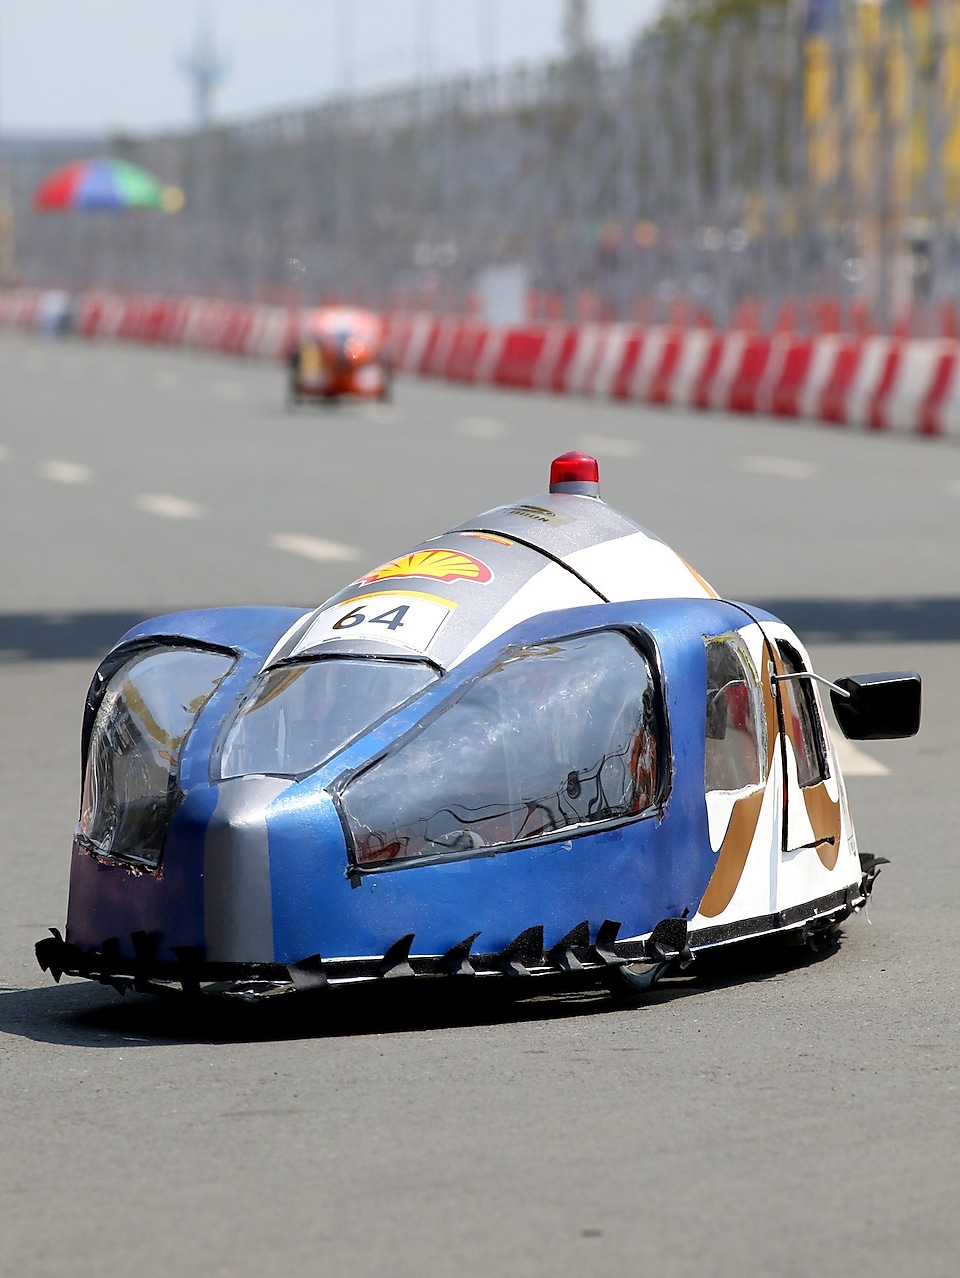 The Mean Machine, #64, Prototype, competing for Team Megalodon from The German University of Technology, Oman runs on the track during day four of the Shell Eco-marathon in Manila, Philippines, Sunday, March 1, 2015.